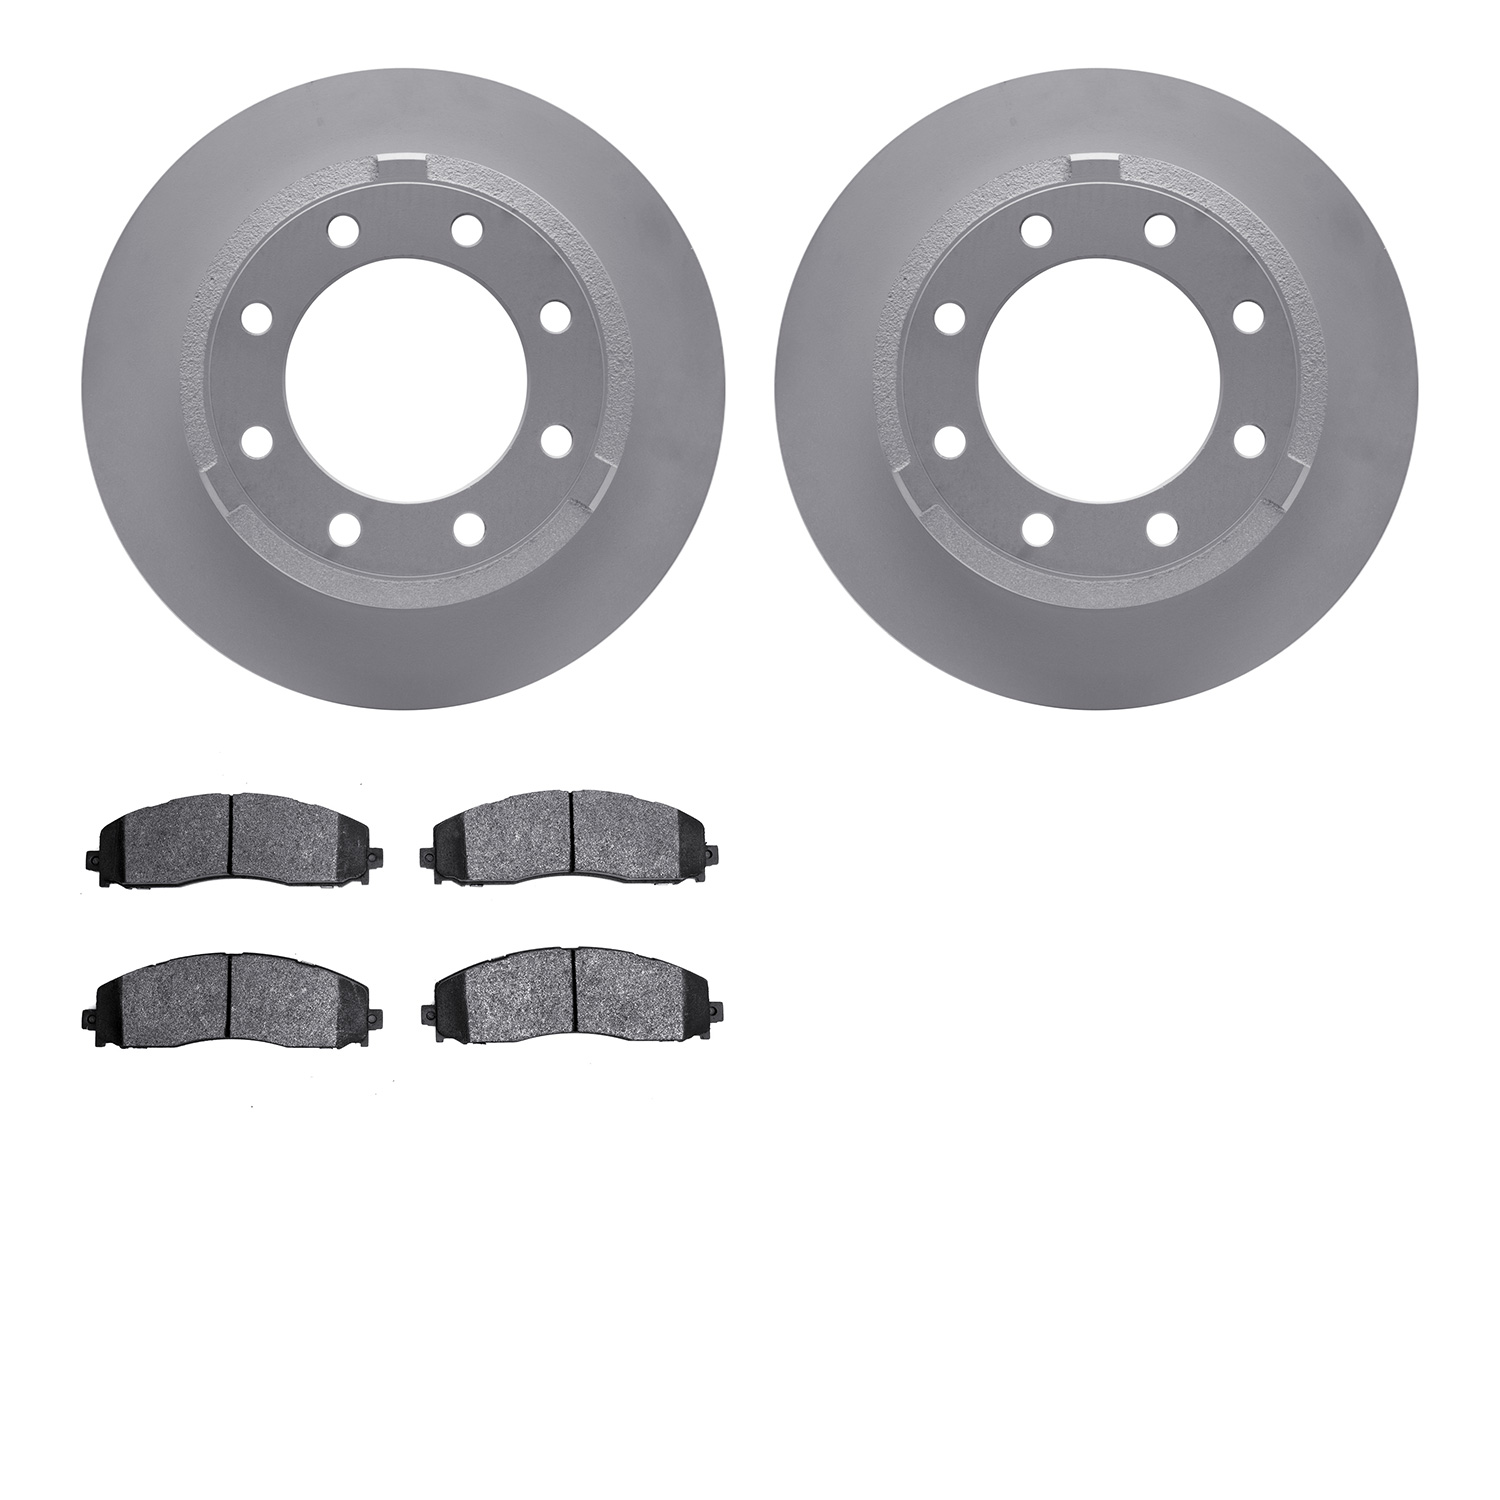 4402-54074 Geospec Brake Rotors with Ultimate-Duty Brake Pads Kit, Fits Select Ford/Lincoln/Mercury/Mazda, Position: Rear